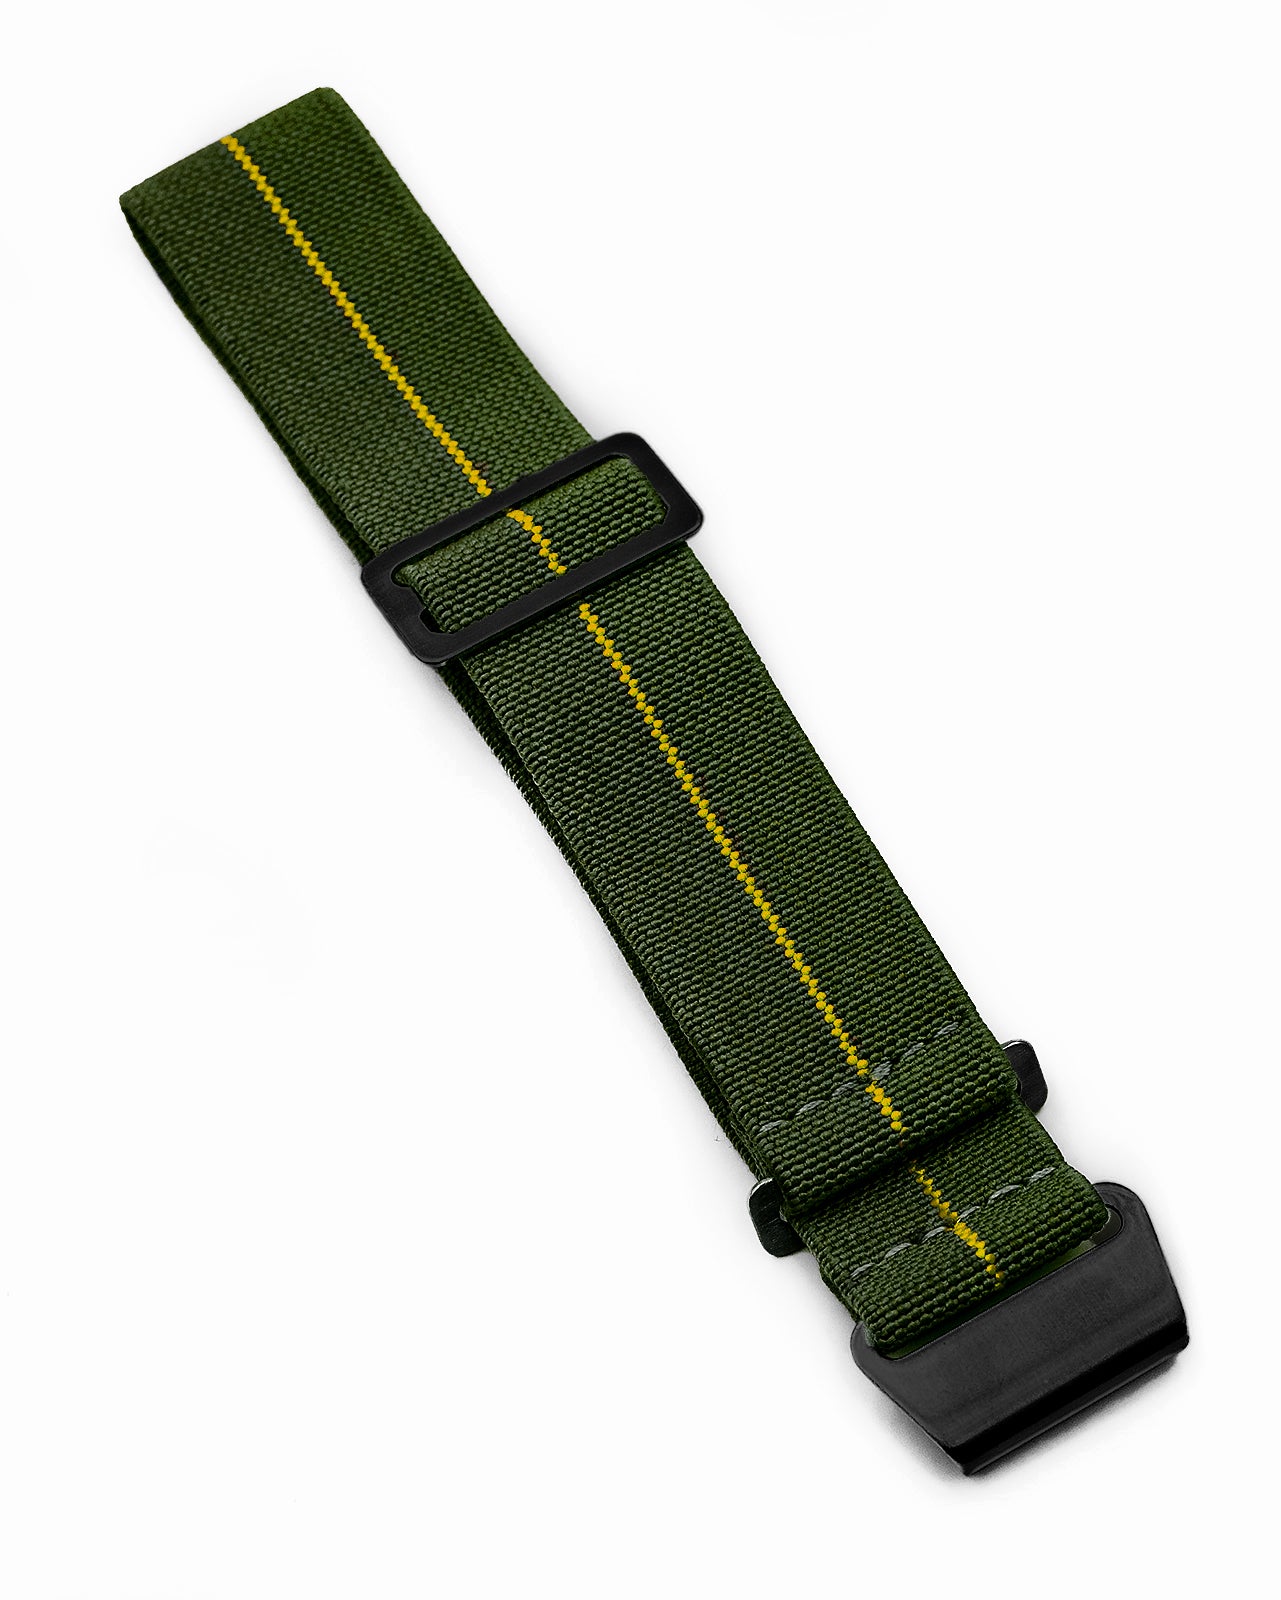 PARA Elastic (Stealth) - Olive Green with Yellow Centerline